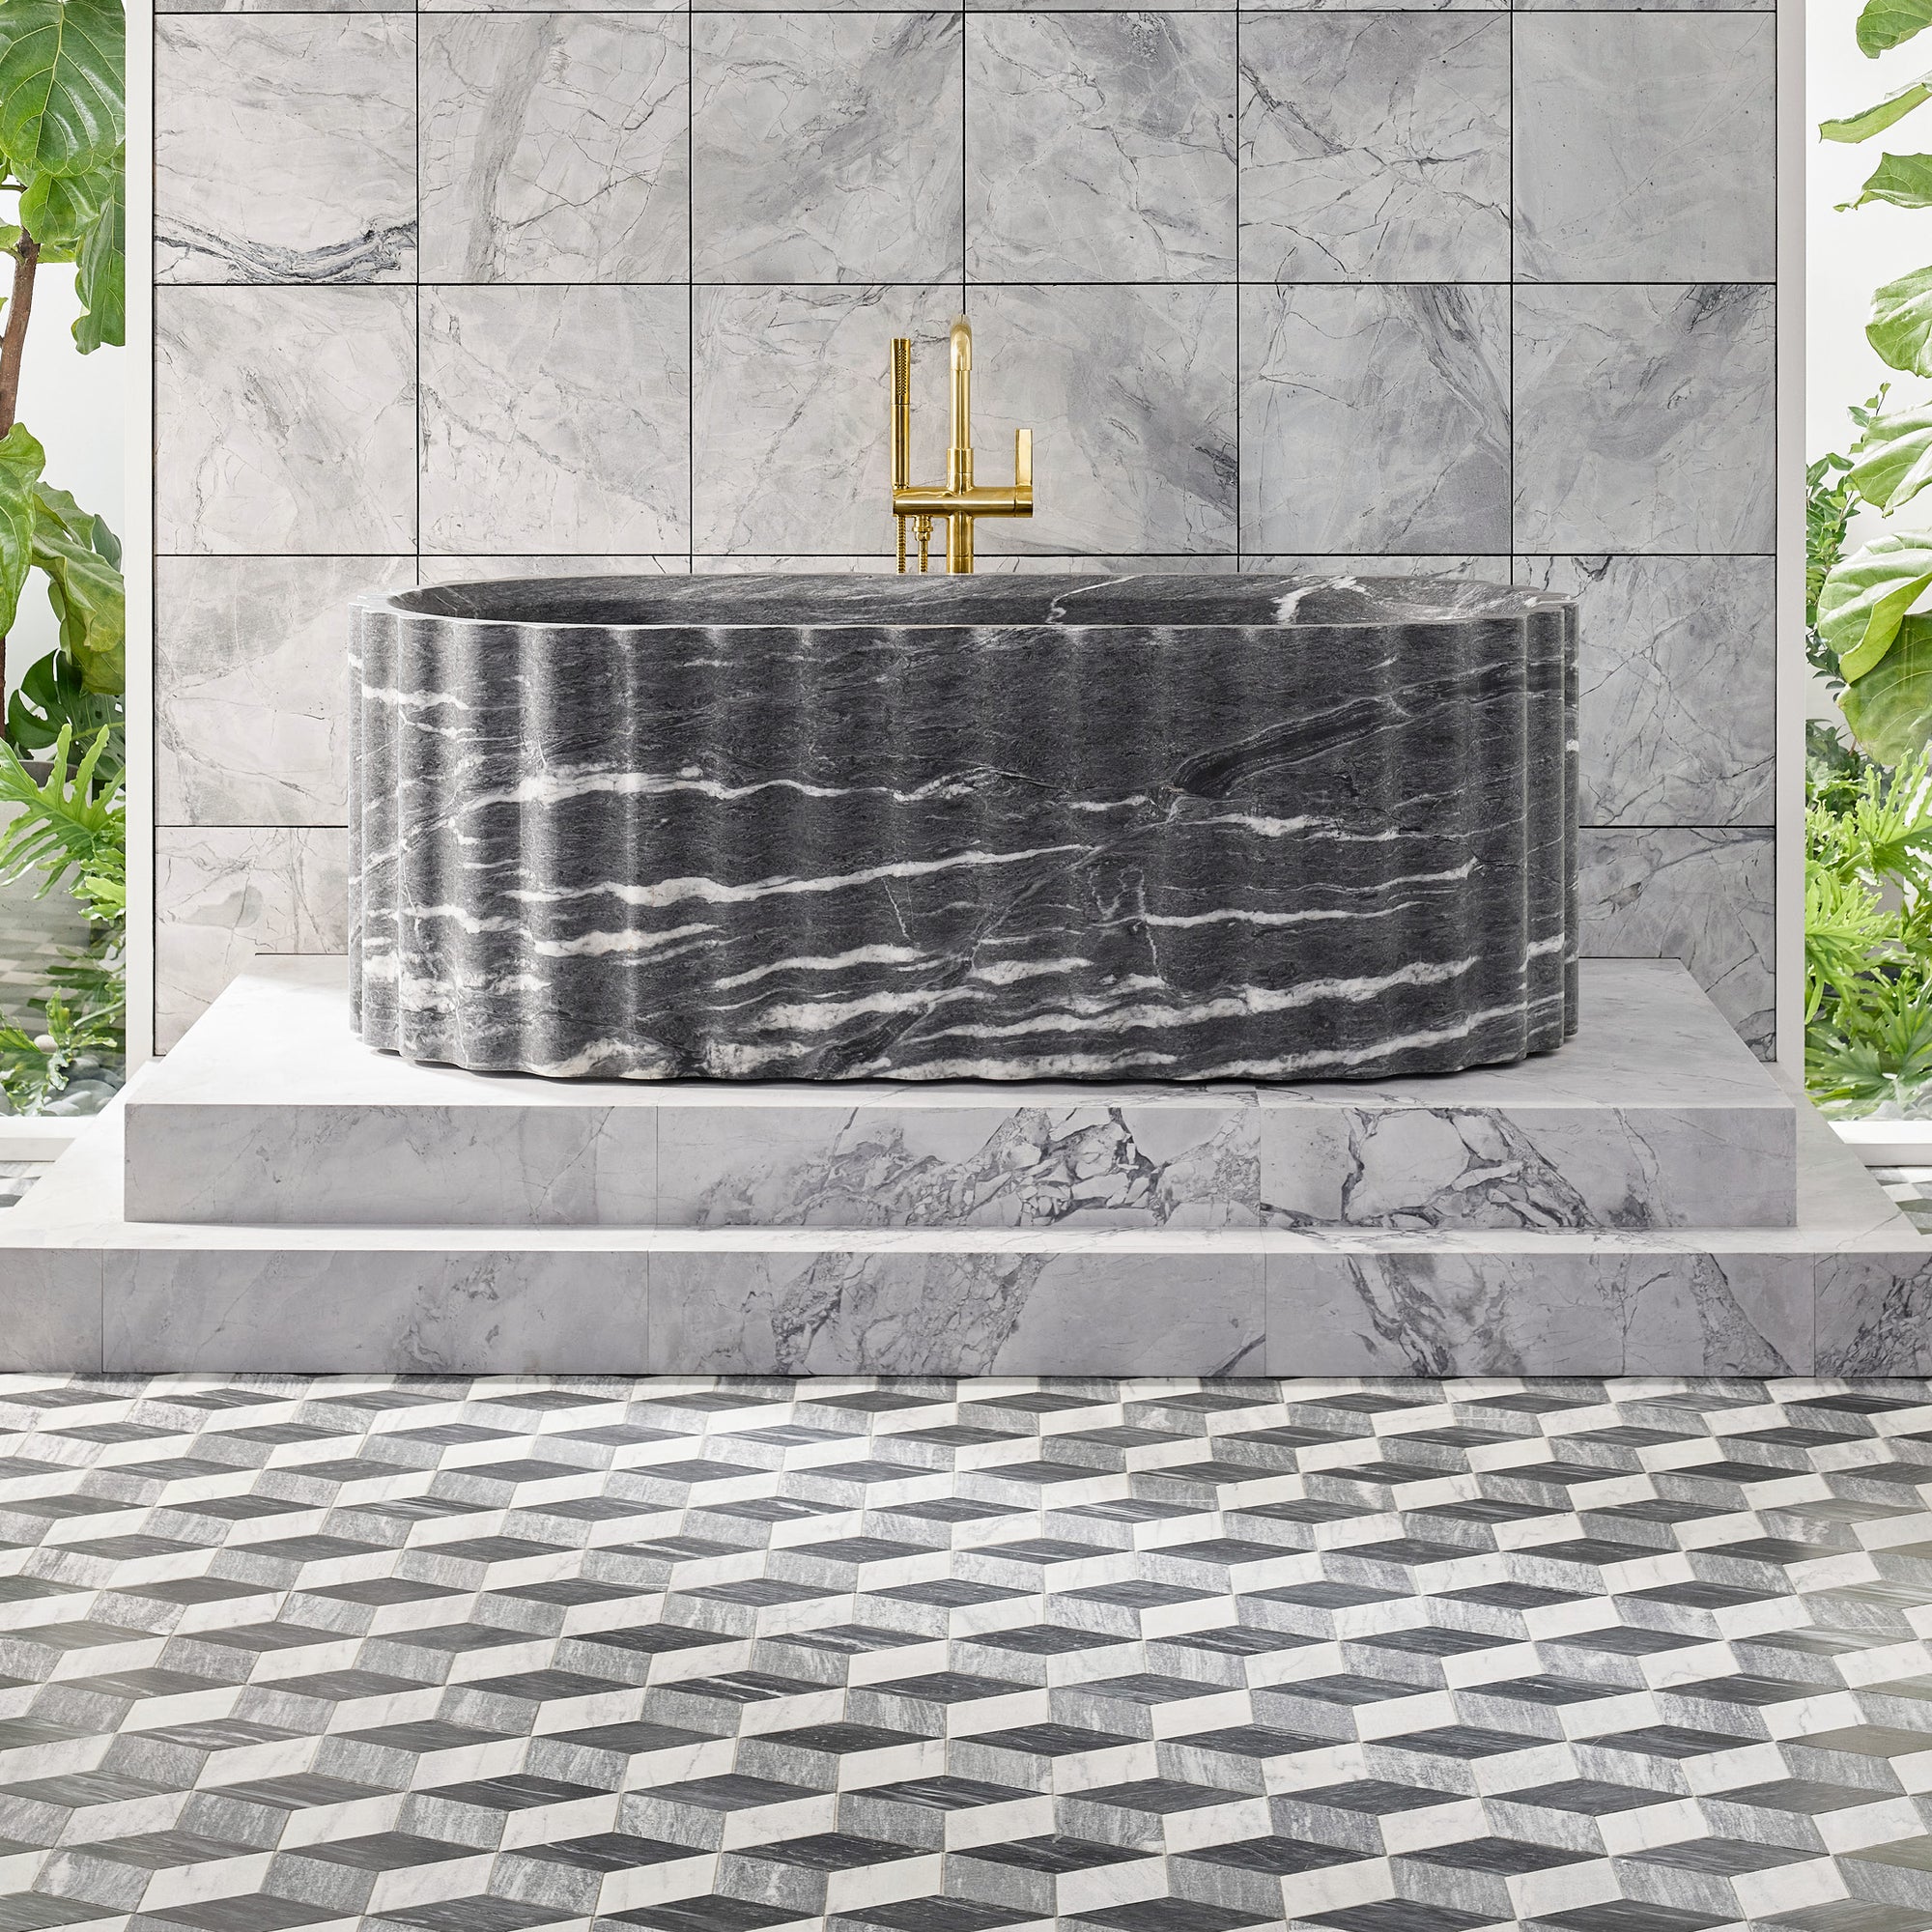 Fluted Bath in Catia Black. Shown with Kallista One Freestanding Bath Faucet in Unlacquered Brass, Contemporary Wand Dual-Function Handshower in Unlacquered Brass